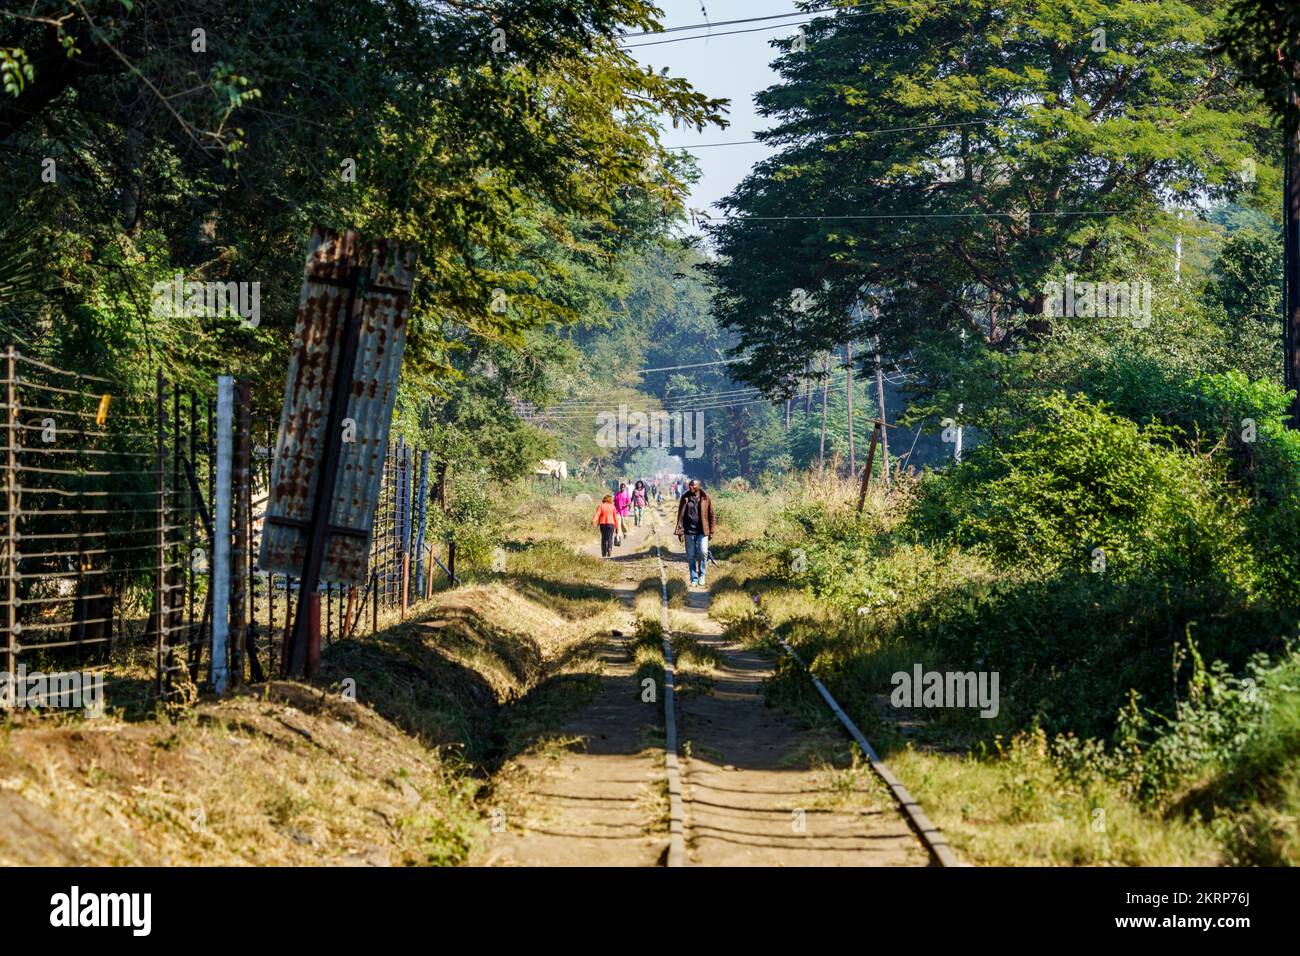 Train tracks on which people walk. Train tracks of the Royal Express in Livingstone. Livingstone, Zambia Stock Photo